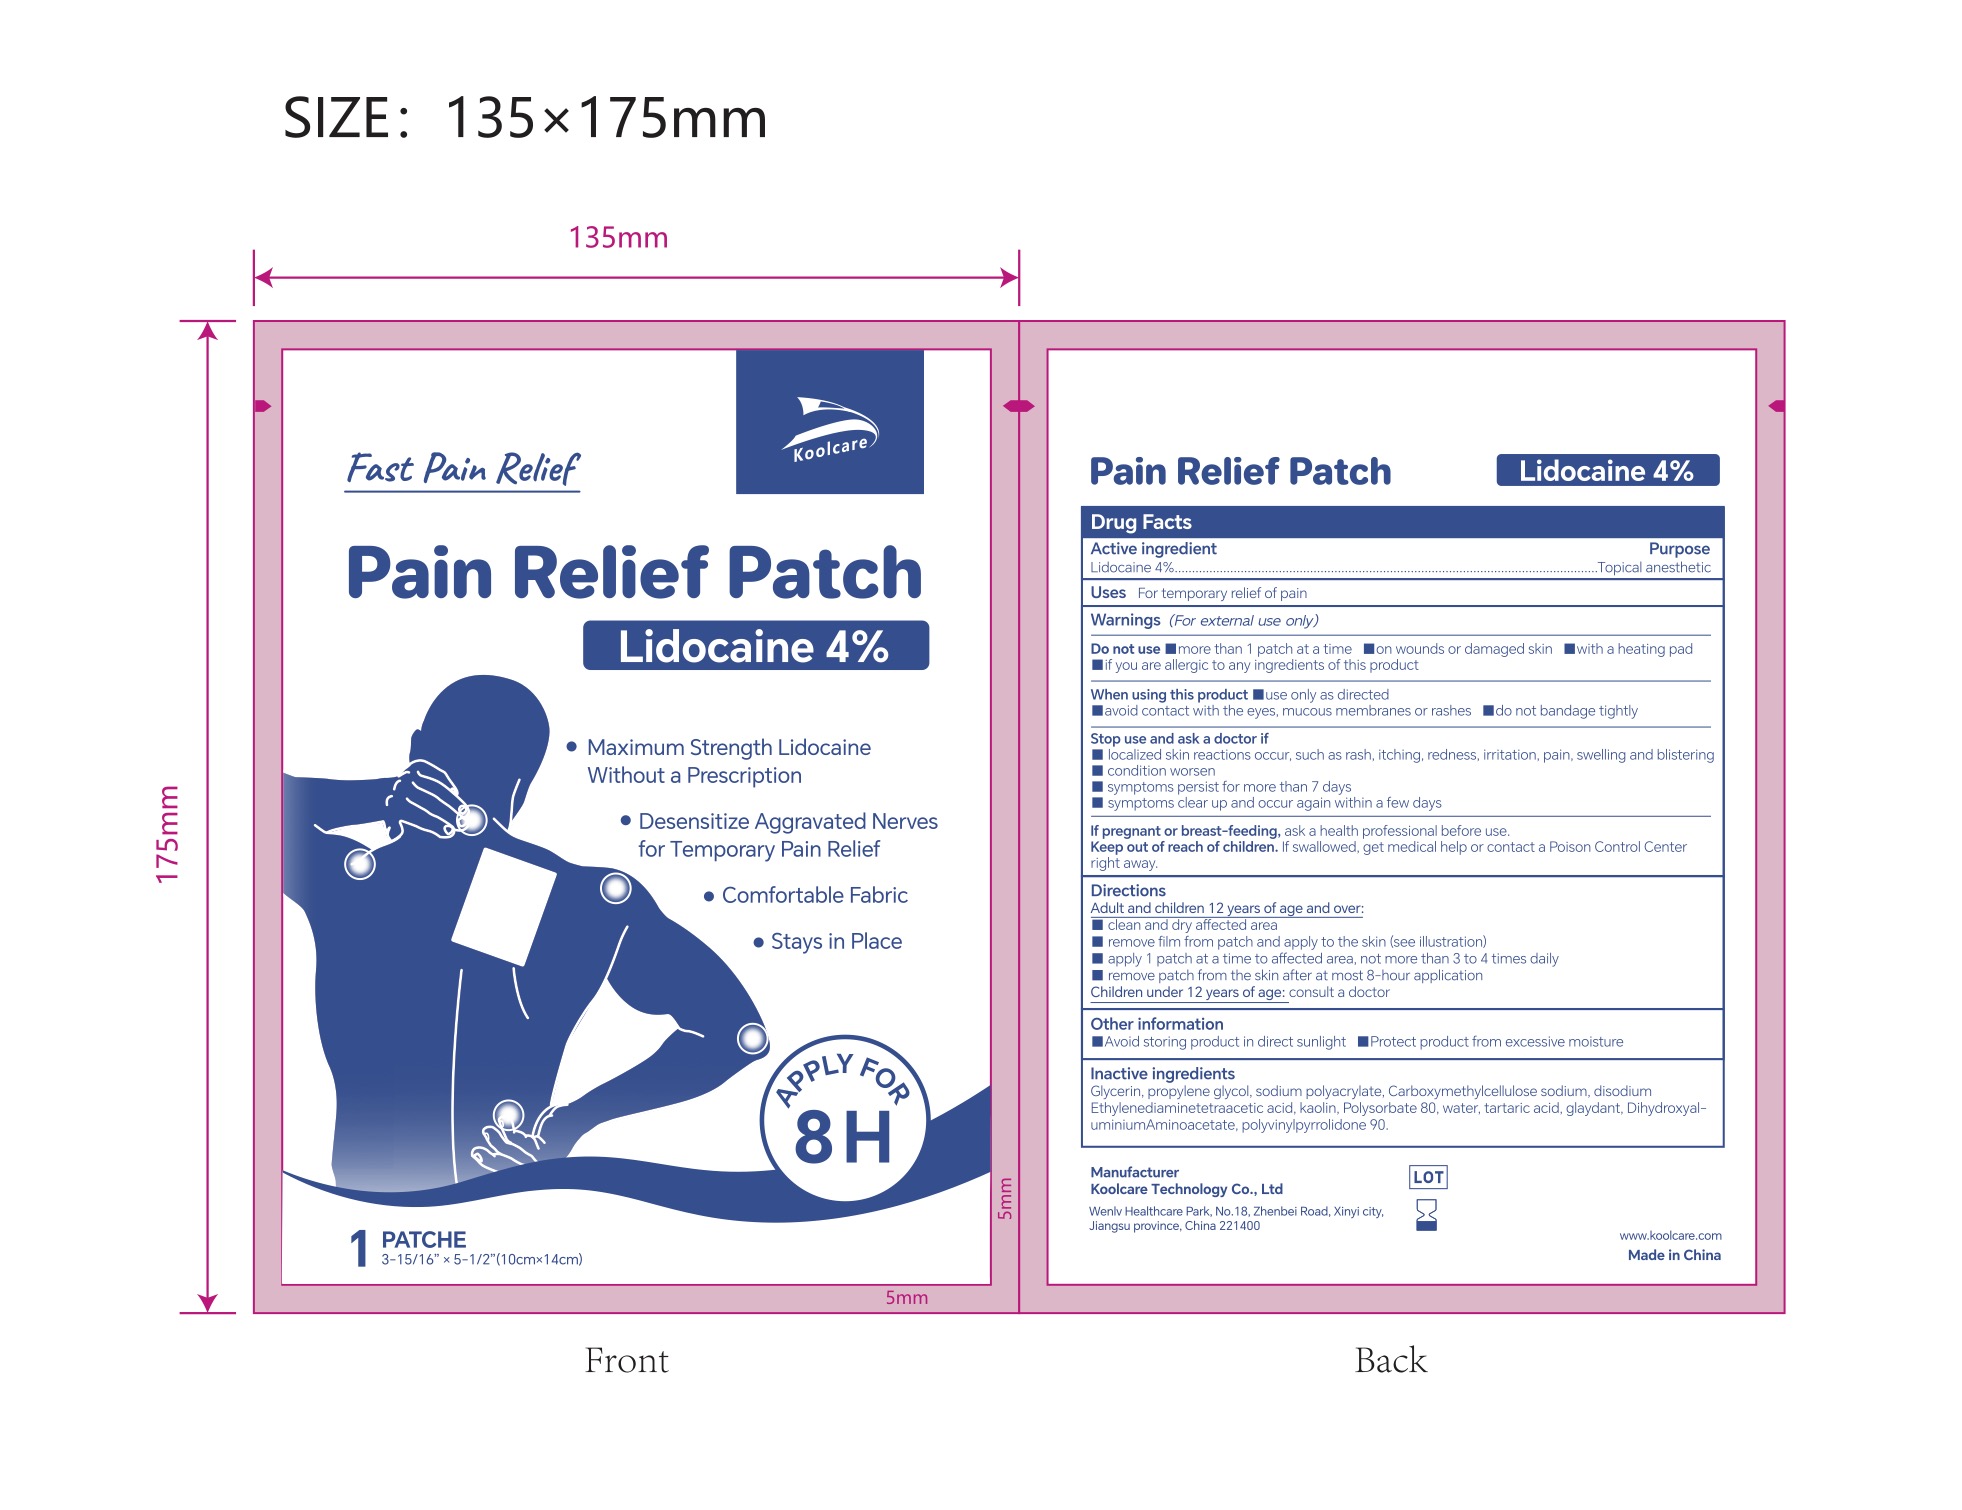 4% Lidocaine Pain Relief Patch NDC: 84205-002-00